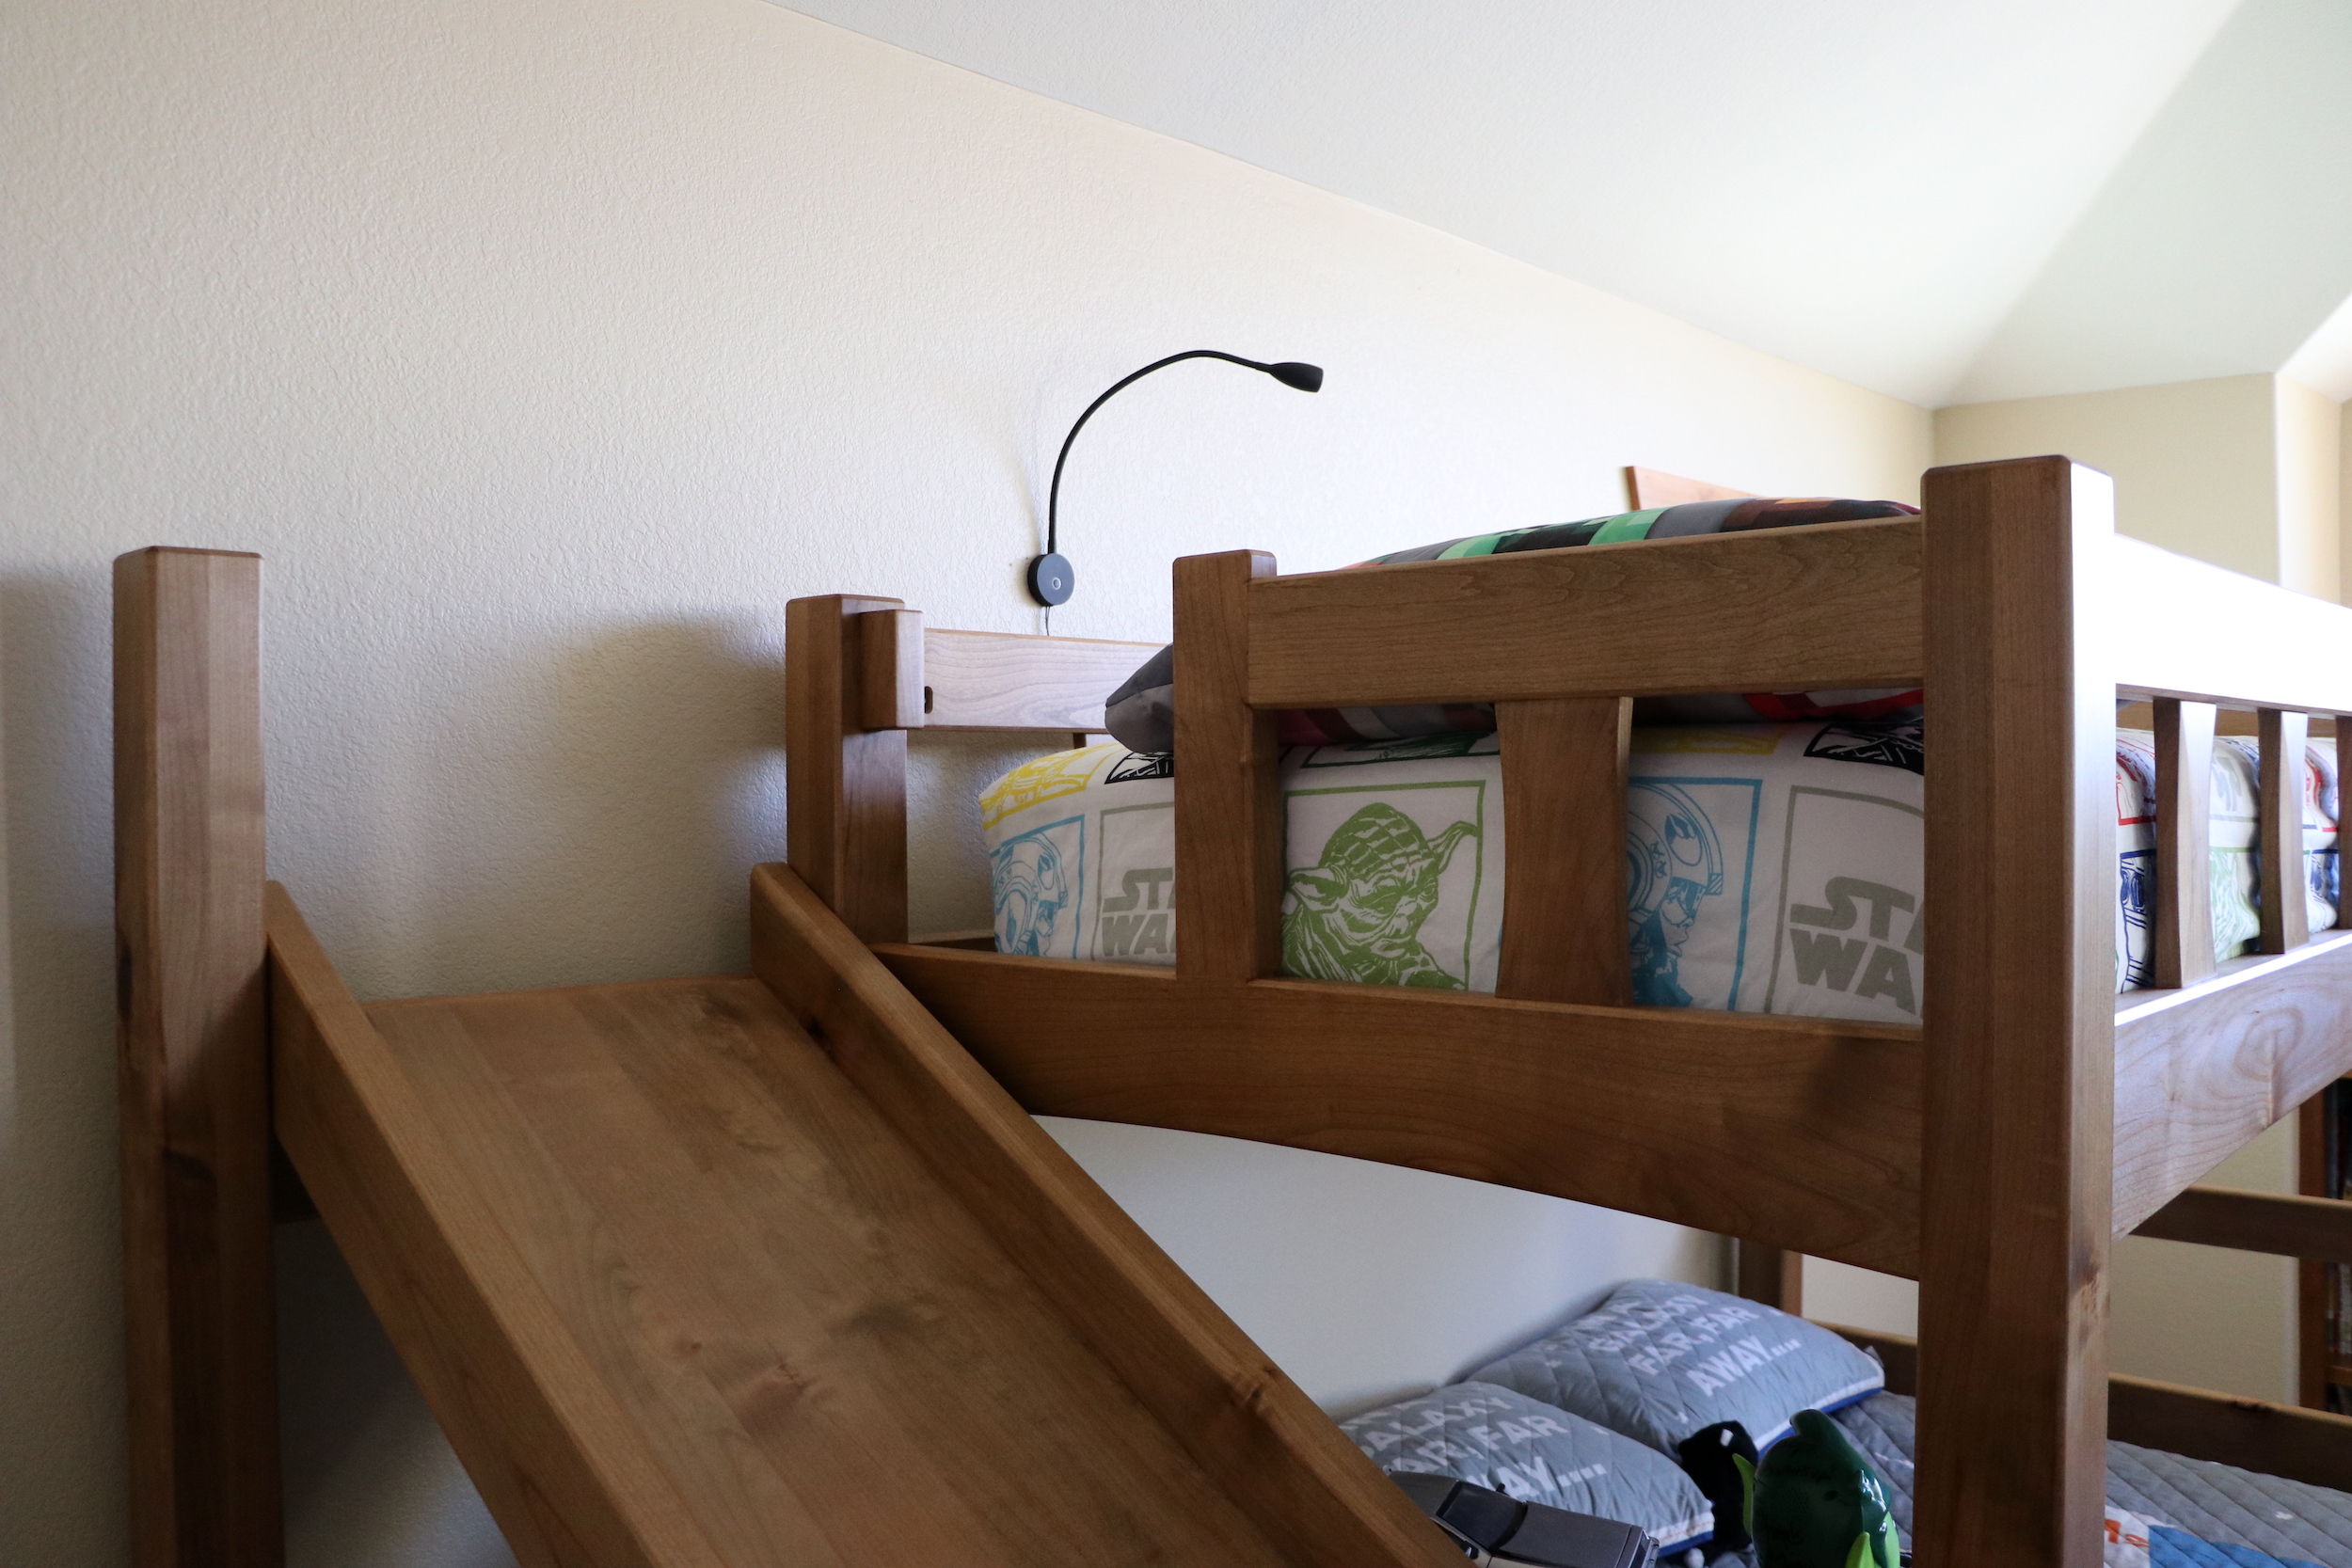 Bunk Bed With Slide The Wood Whisperer, How To Build A Slide For Bunk Bed